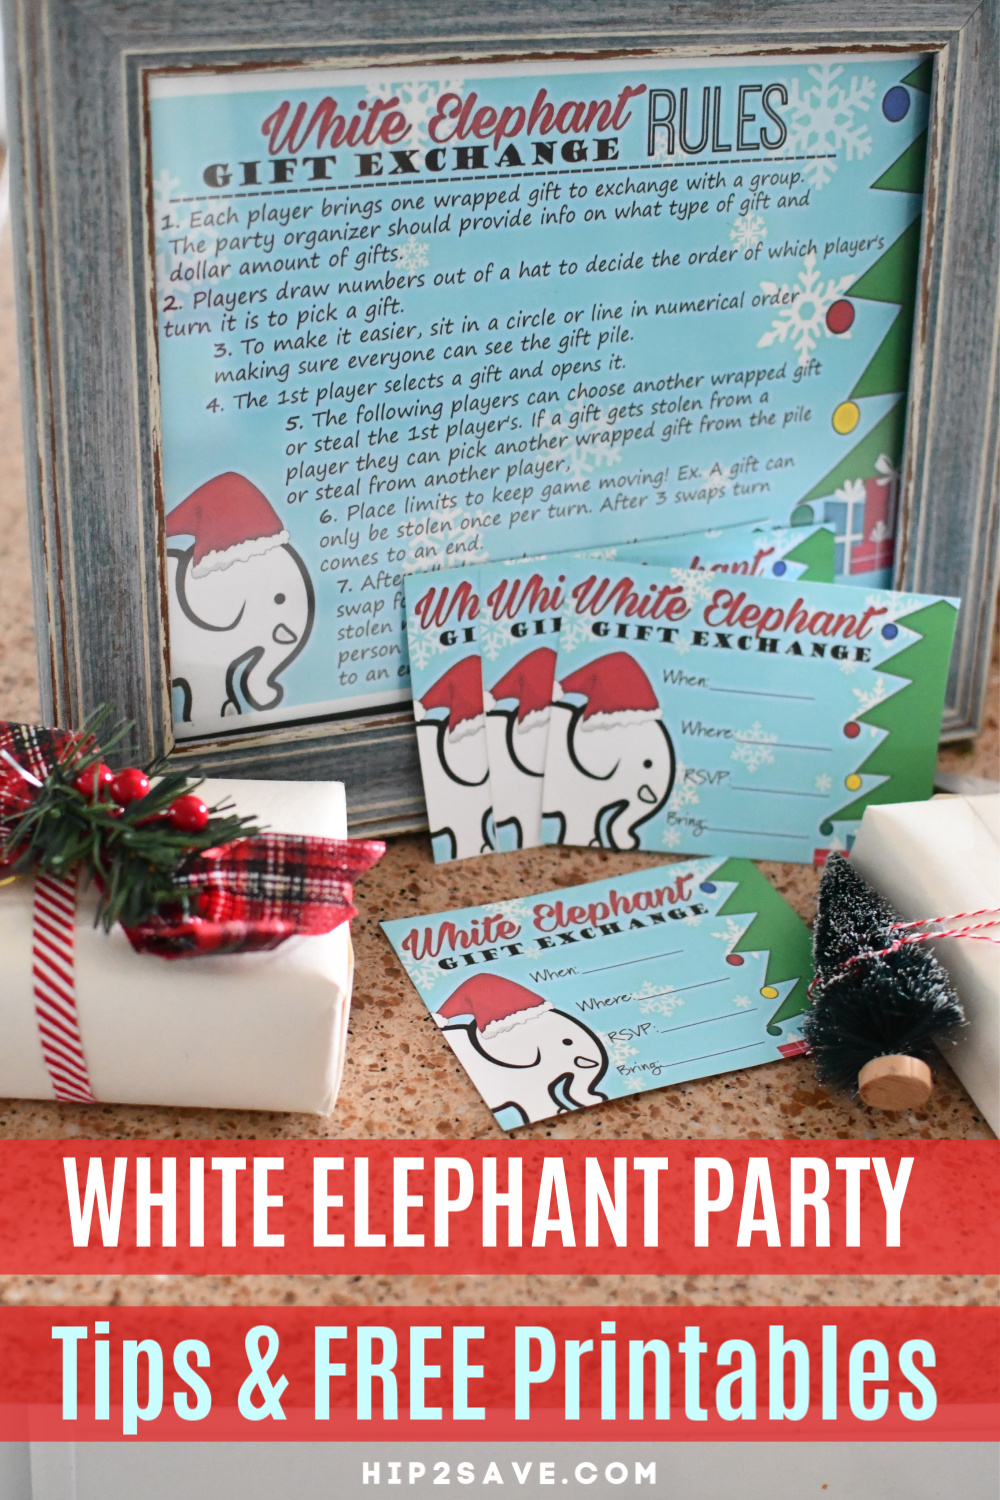 White Elephant Game | Gift Exchange Rules, Printable Invitations, & Gifts